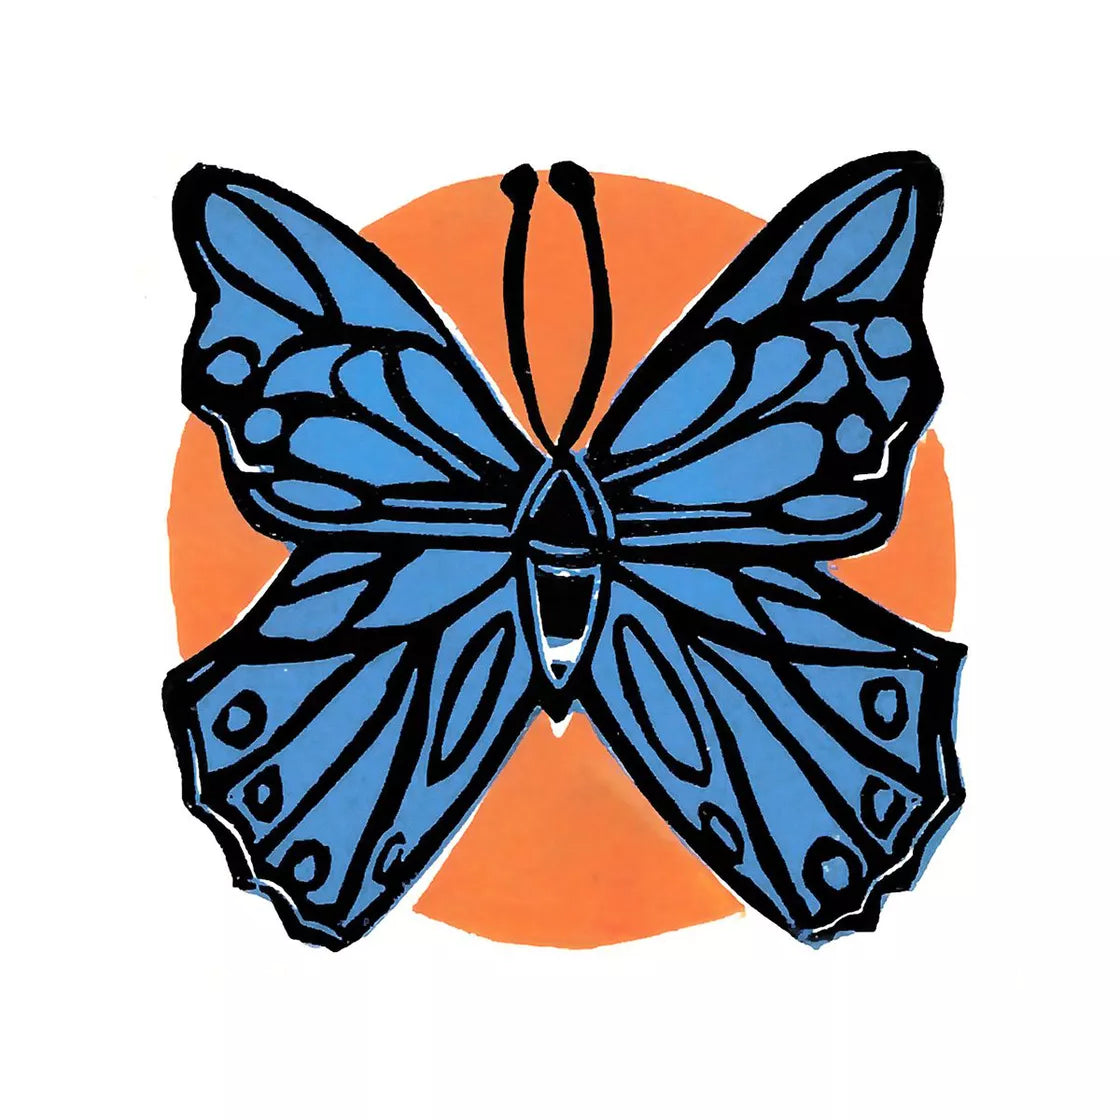 Blue Butterfly (2018) Linocut print from a limited edition of 30